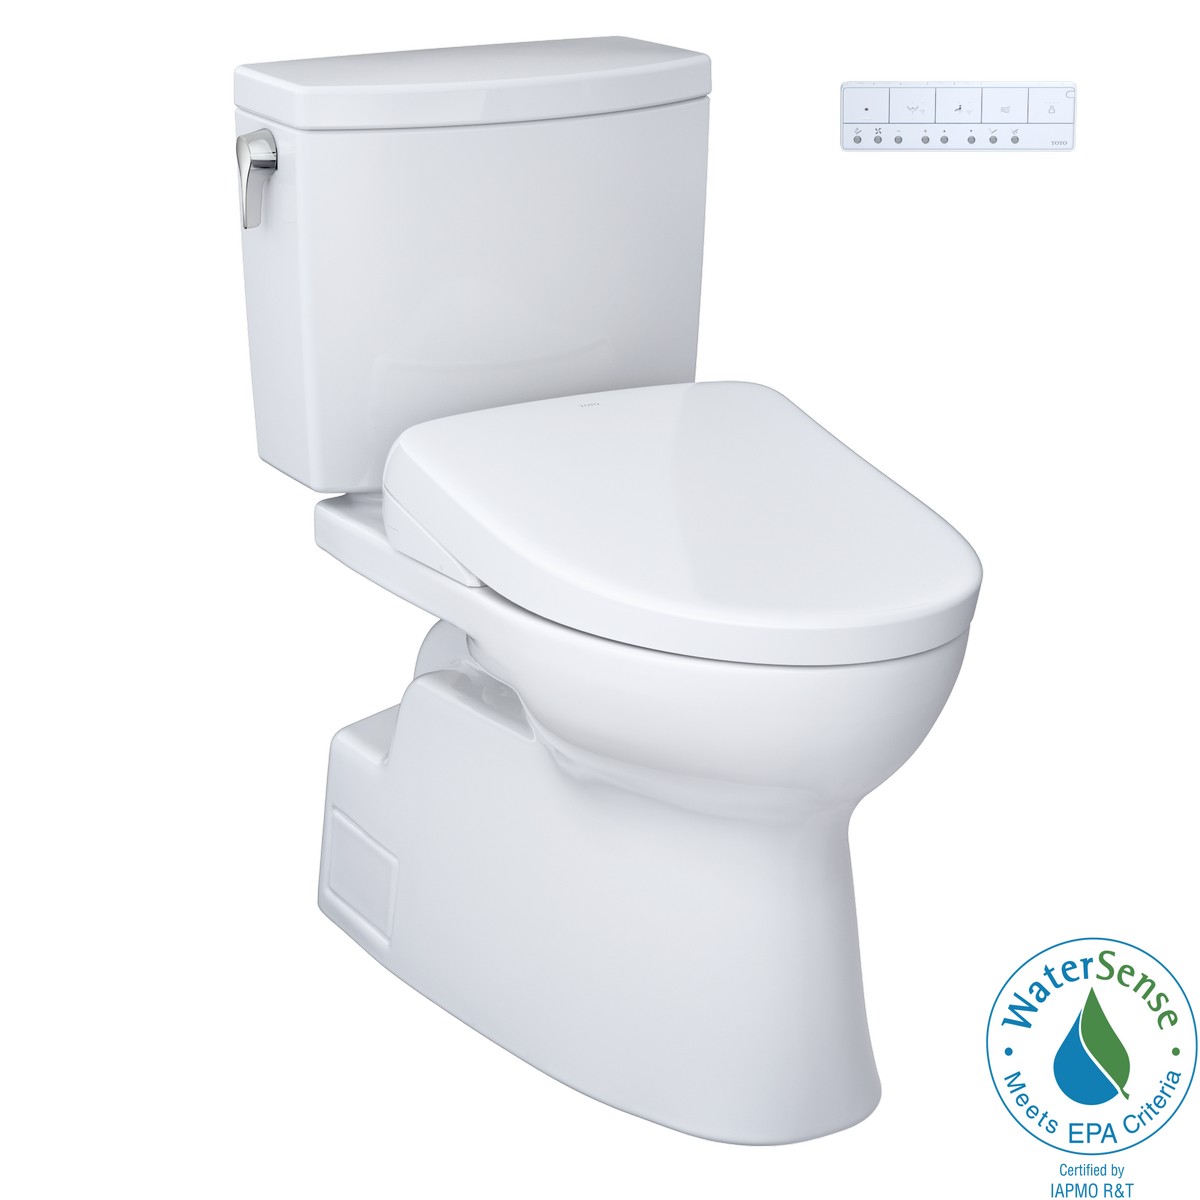 TOTO MW4744736CUF#01 WASHLET+ VESPIN II 1.0 GPF TWO PIECE ELONGATED TOILET WITH WASHLET+ S7A BIDET SEAT IN COTTON WHITE